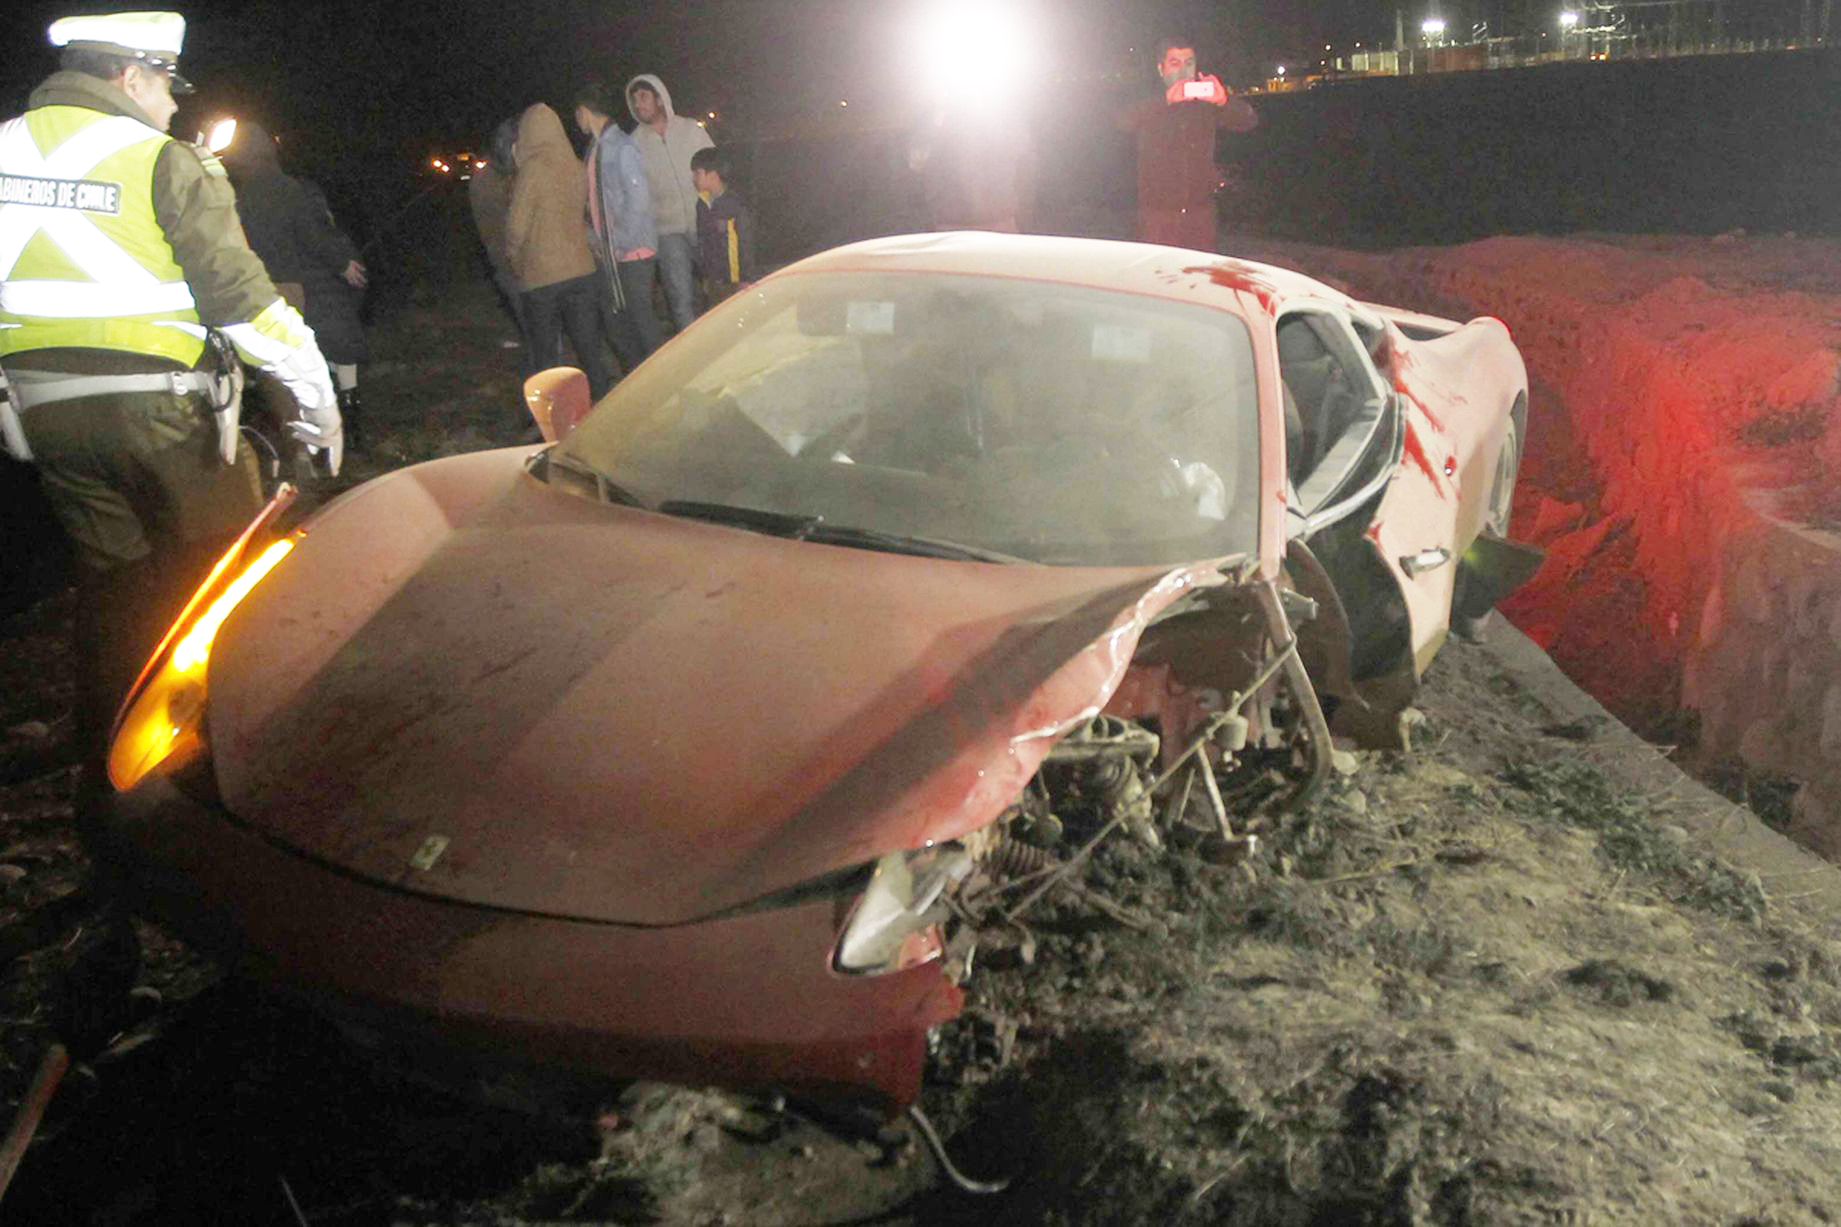 A-red-Ferrari-belonging-to-Arturo-Vidal-is-seen-after-a-car-crash-on-a-highway-south-of-Santiago (1)